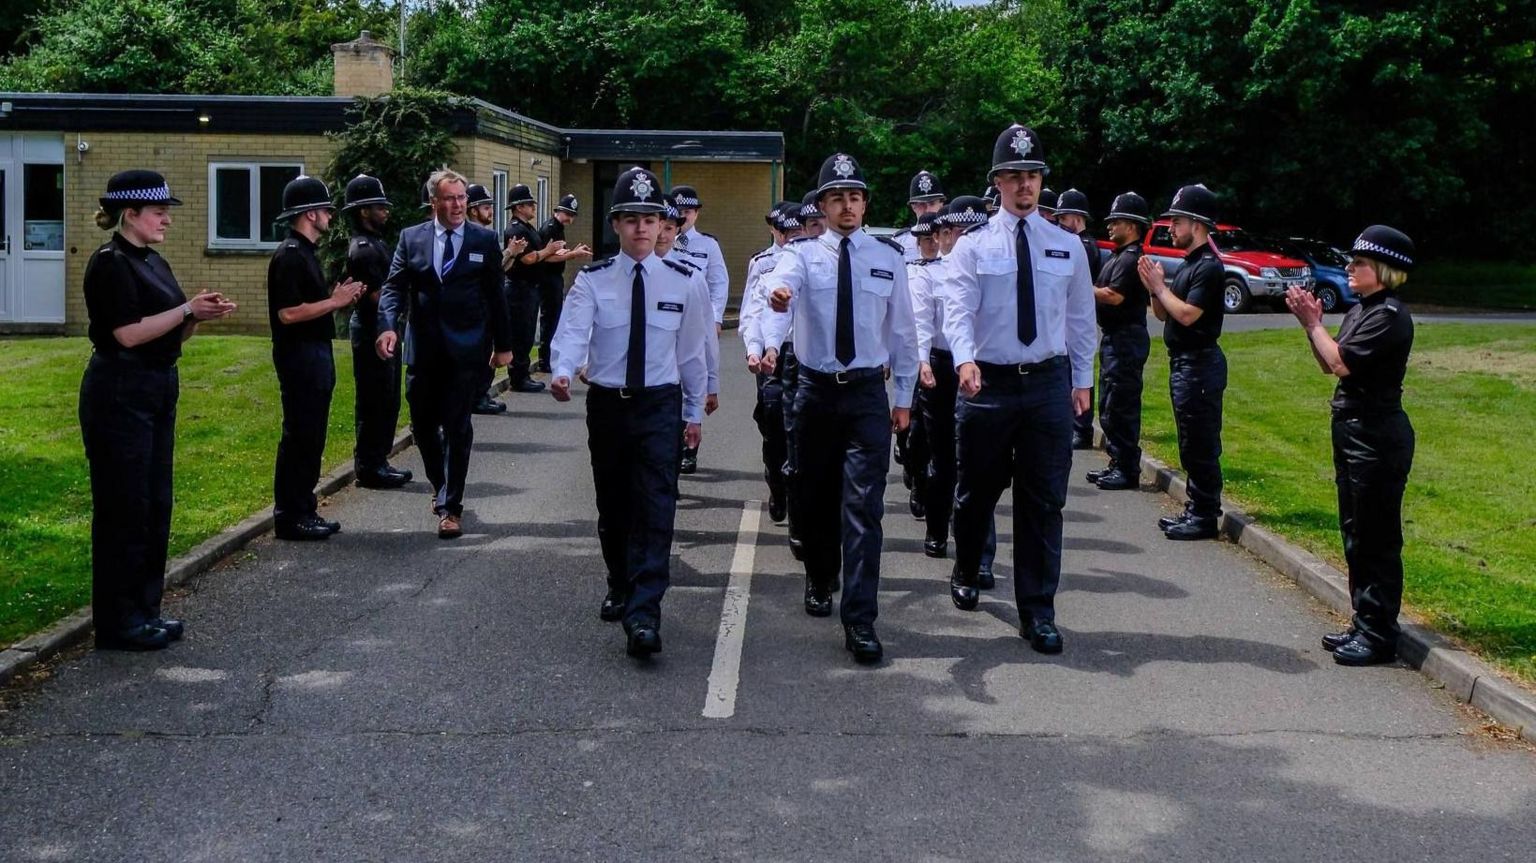 Police recruits being clapped by Cambridgeshire Police officers